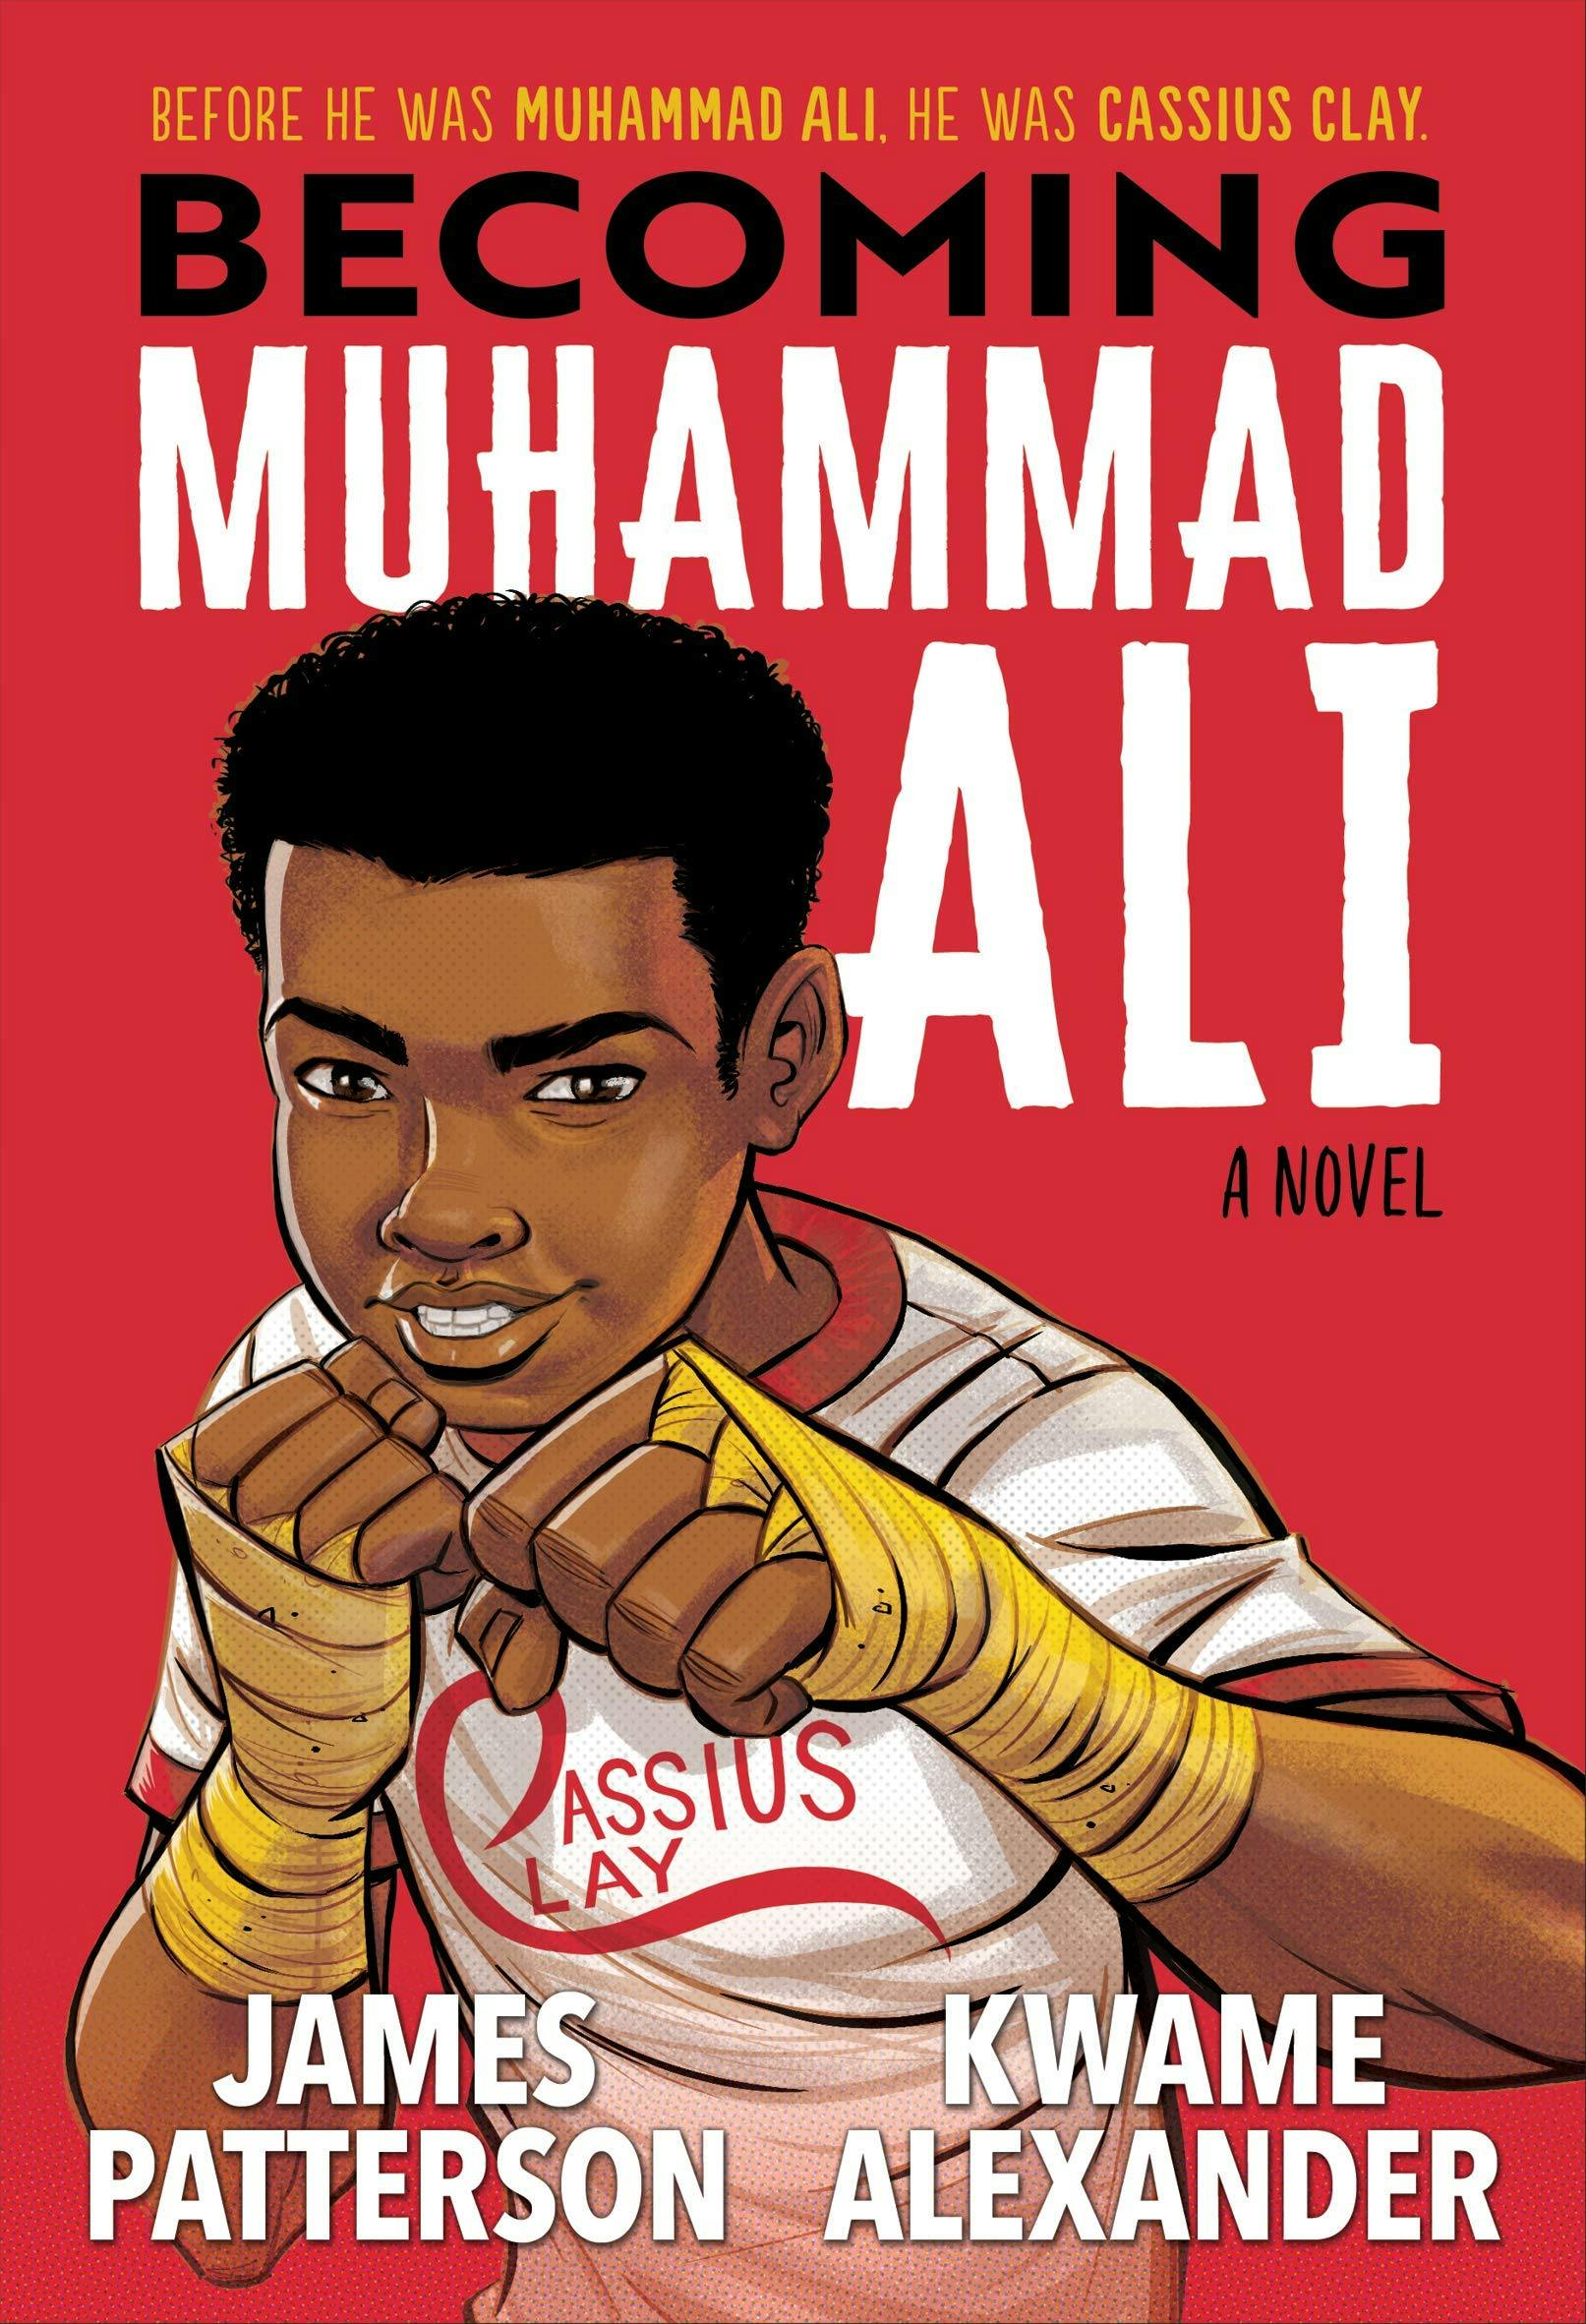 Children's book "Becoming Muhammad Ali" by James Patterson and Kwame Alexander